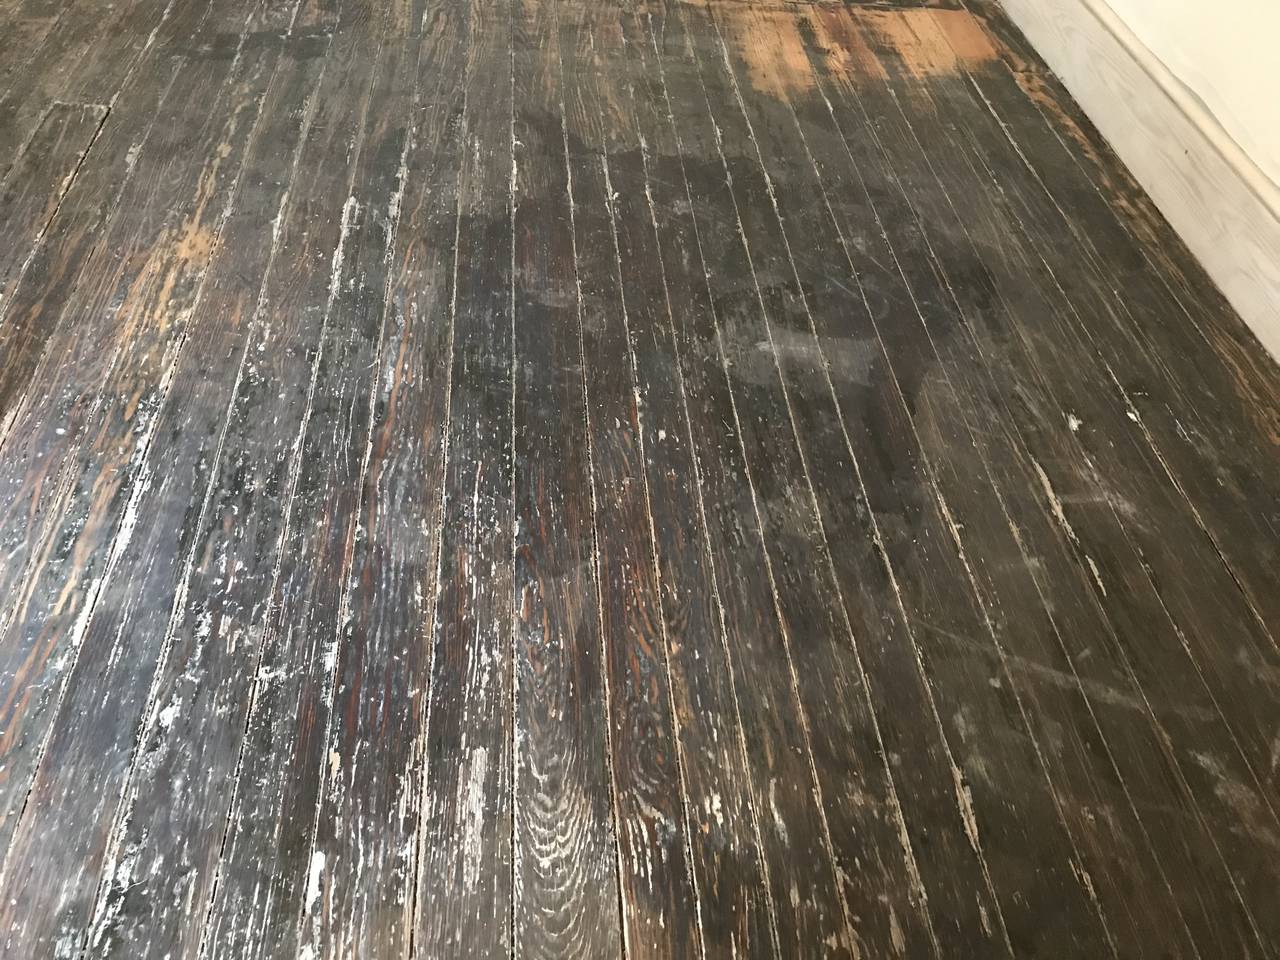 The floors in Tim Prudente's Baltimore rowhome. He has been working to restore the once-vacant property.